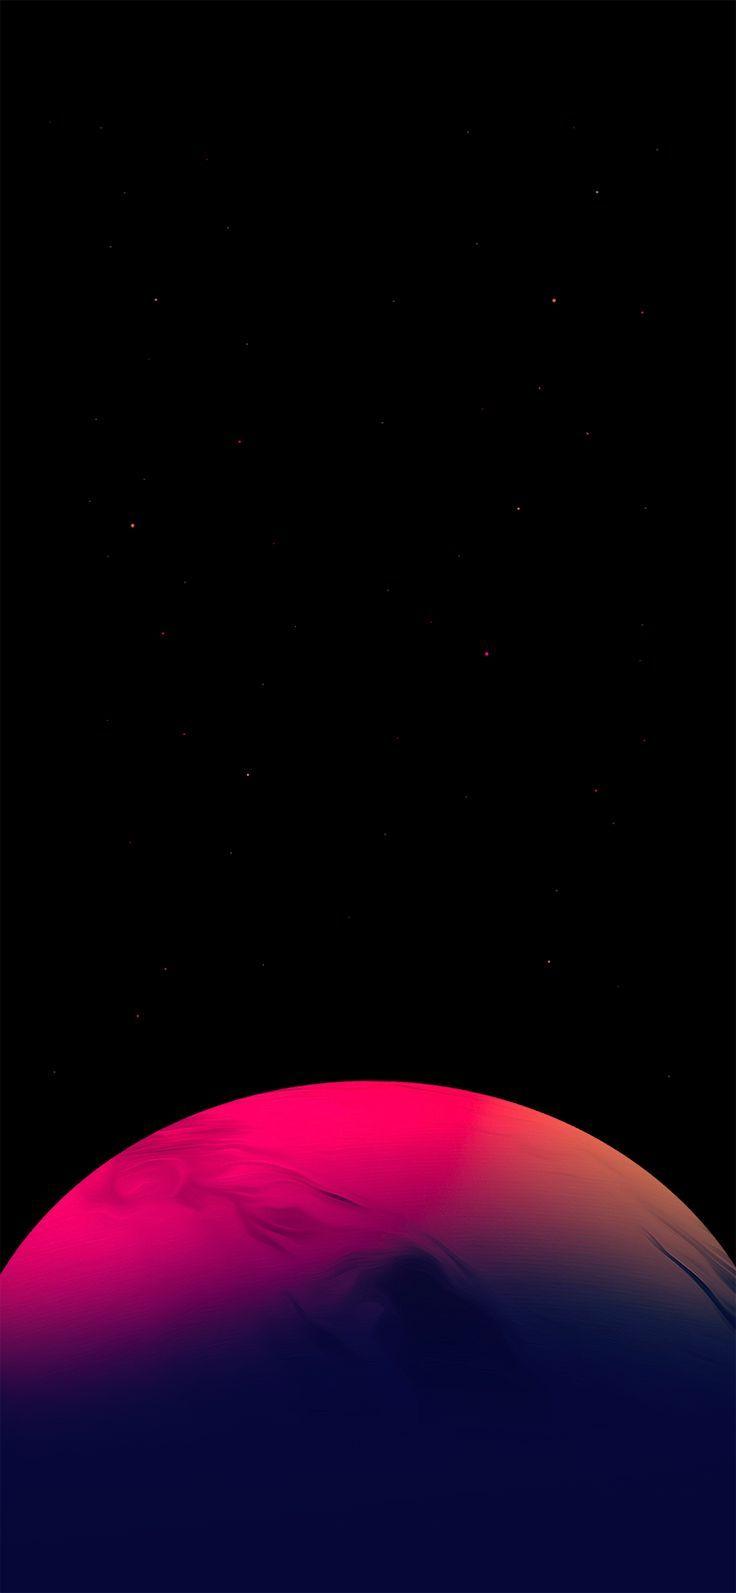 4k Planet iPhone Wallpapers - Wallpaper Cave